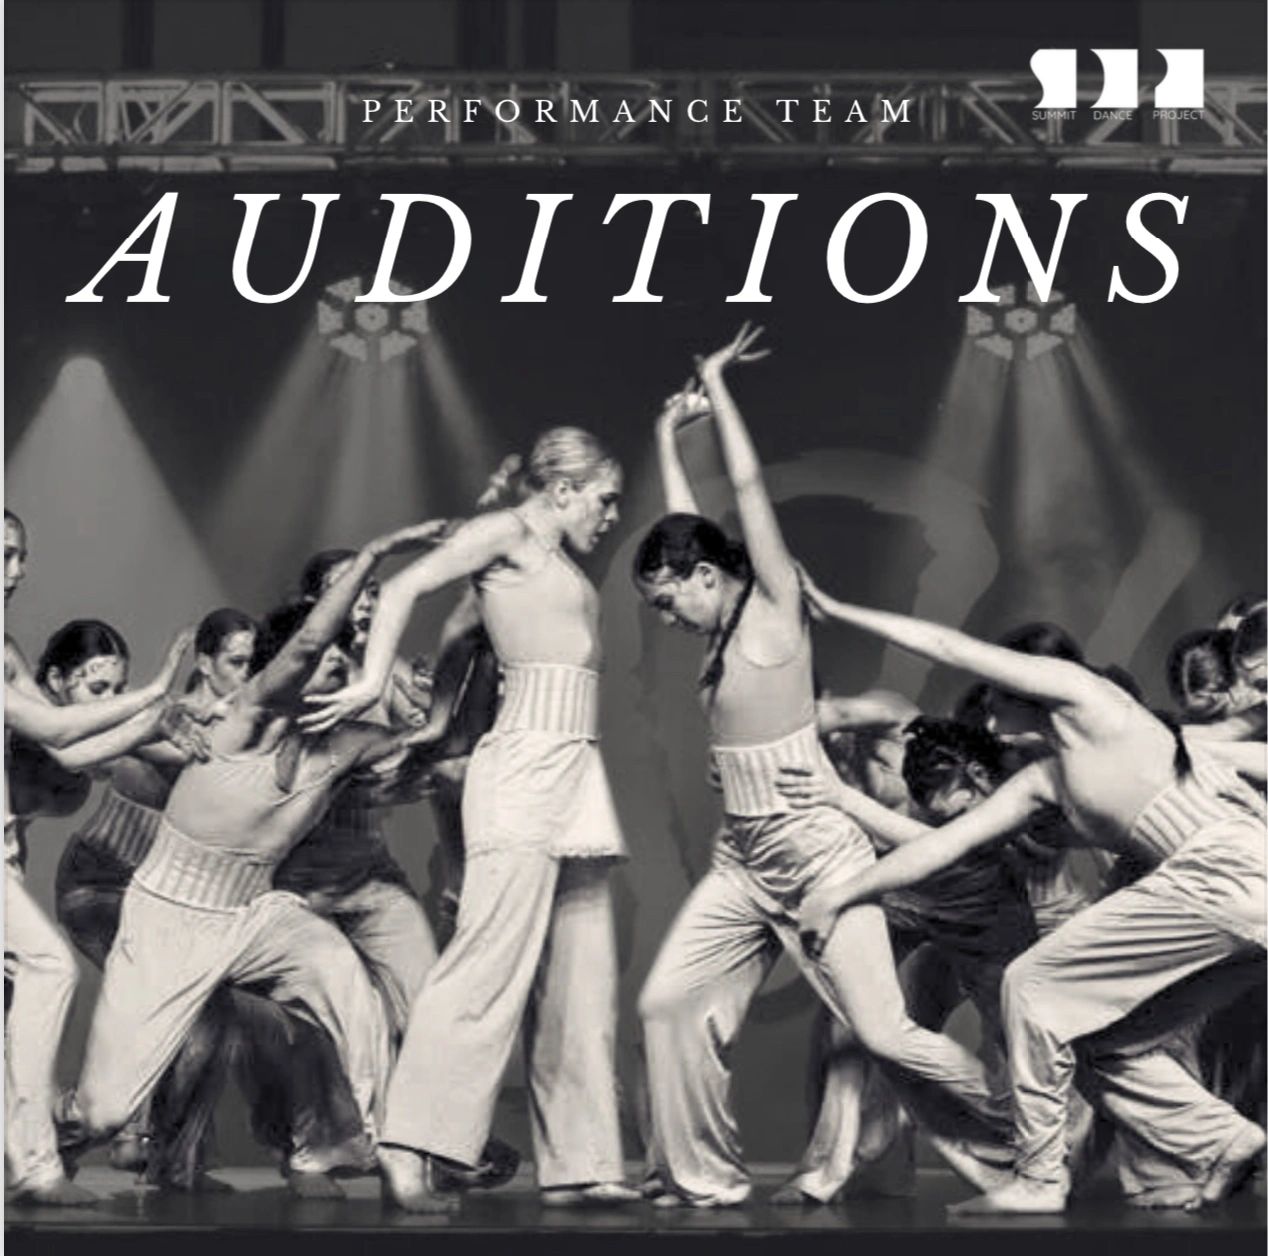 Performance Team auditions will be held Saturday, May 18th!  To sign up or for more information cont